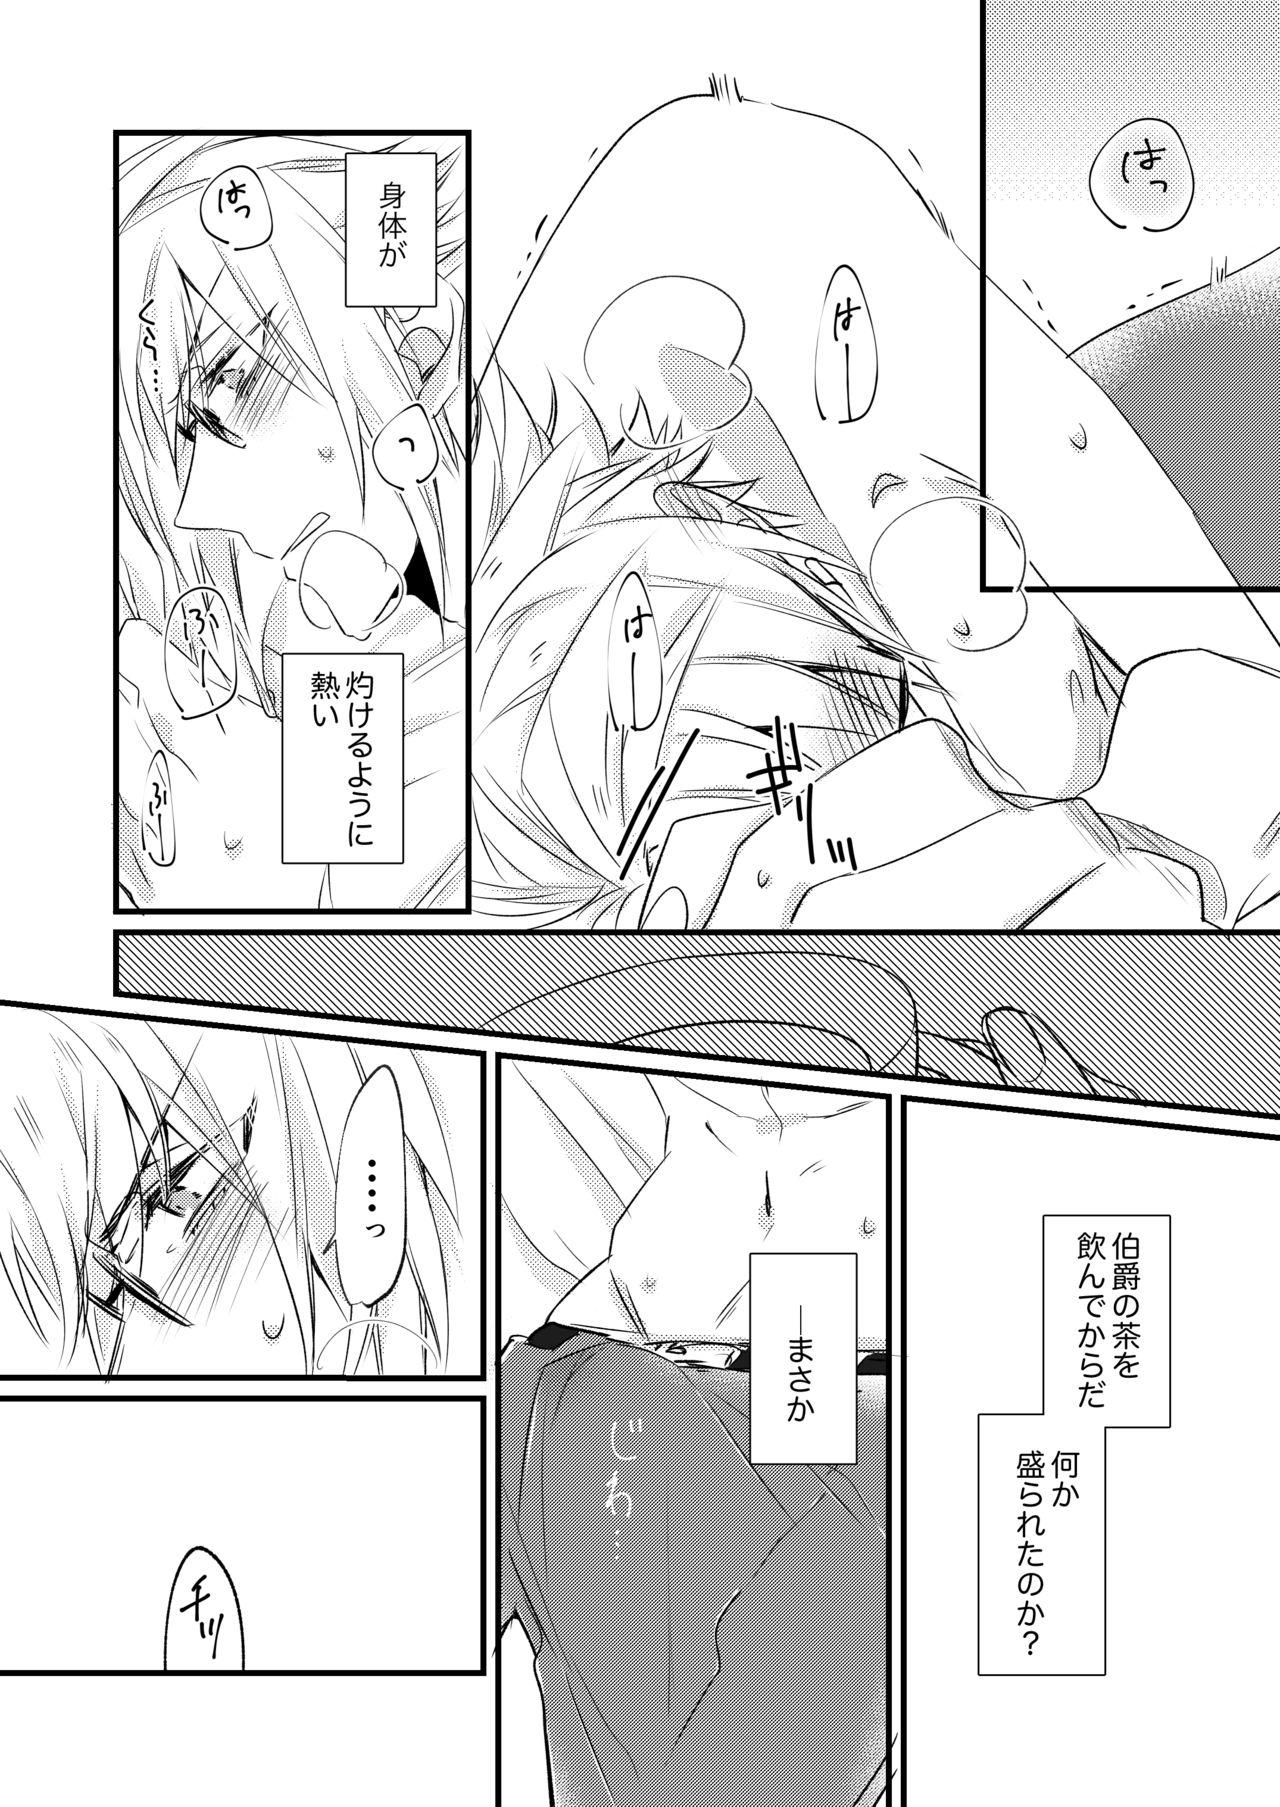 18yearsold 熱におぼれる - Code realize sousei no himegimi Curves - Page 10